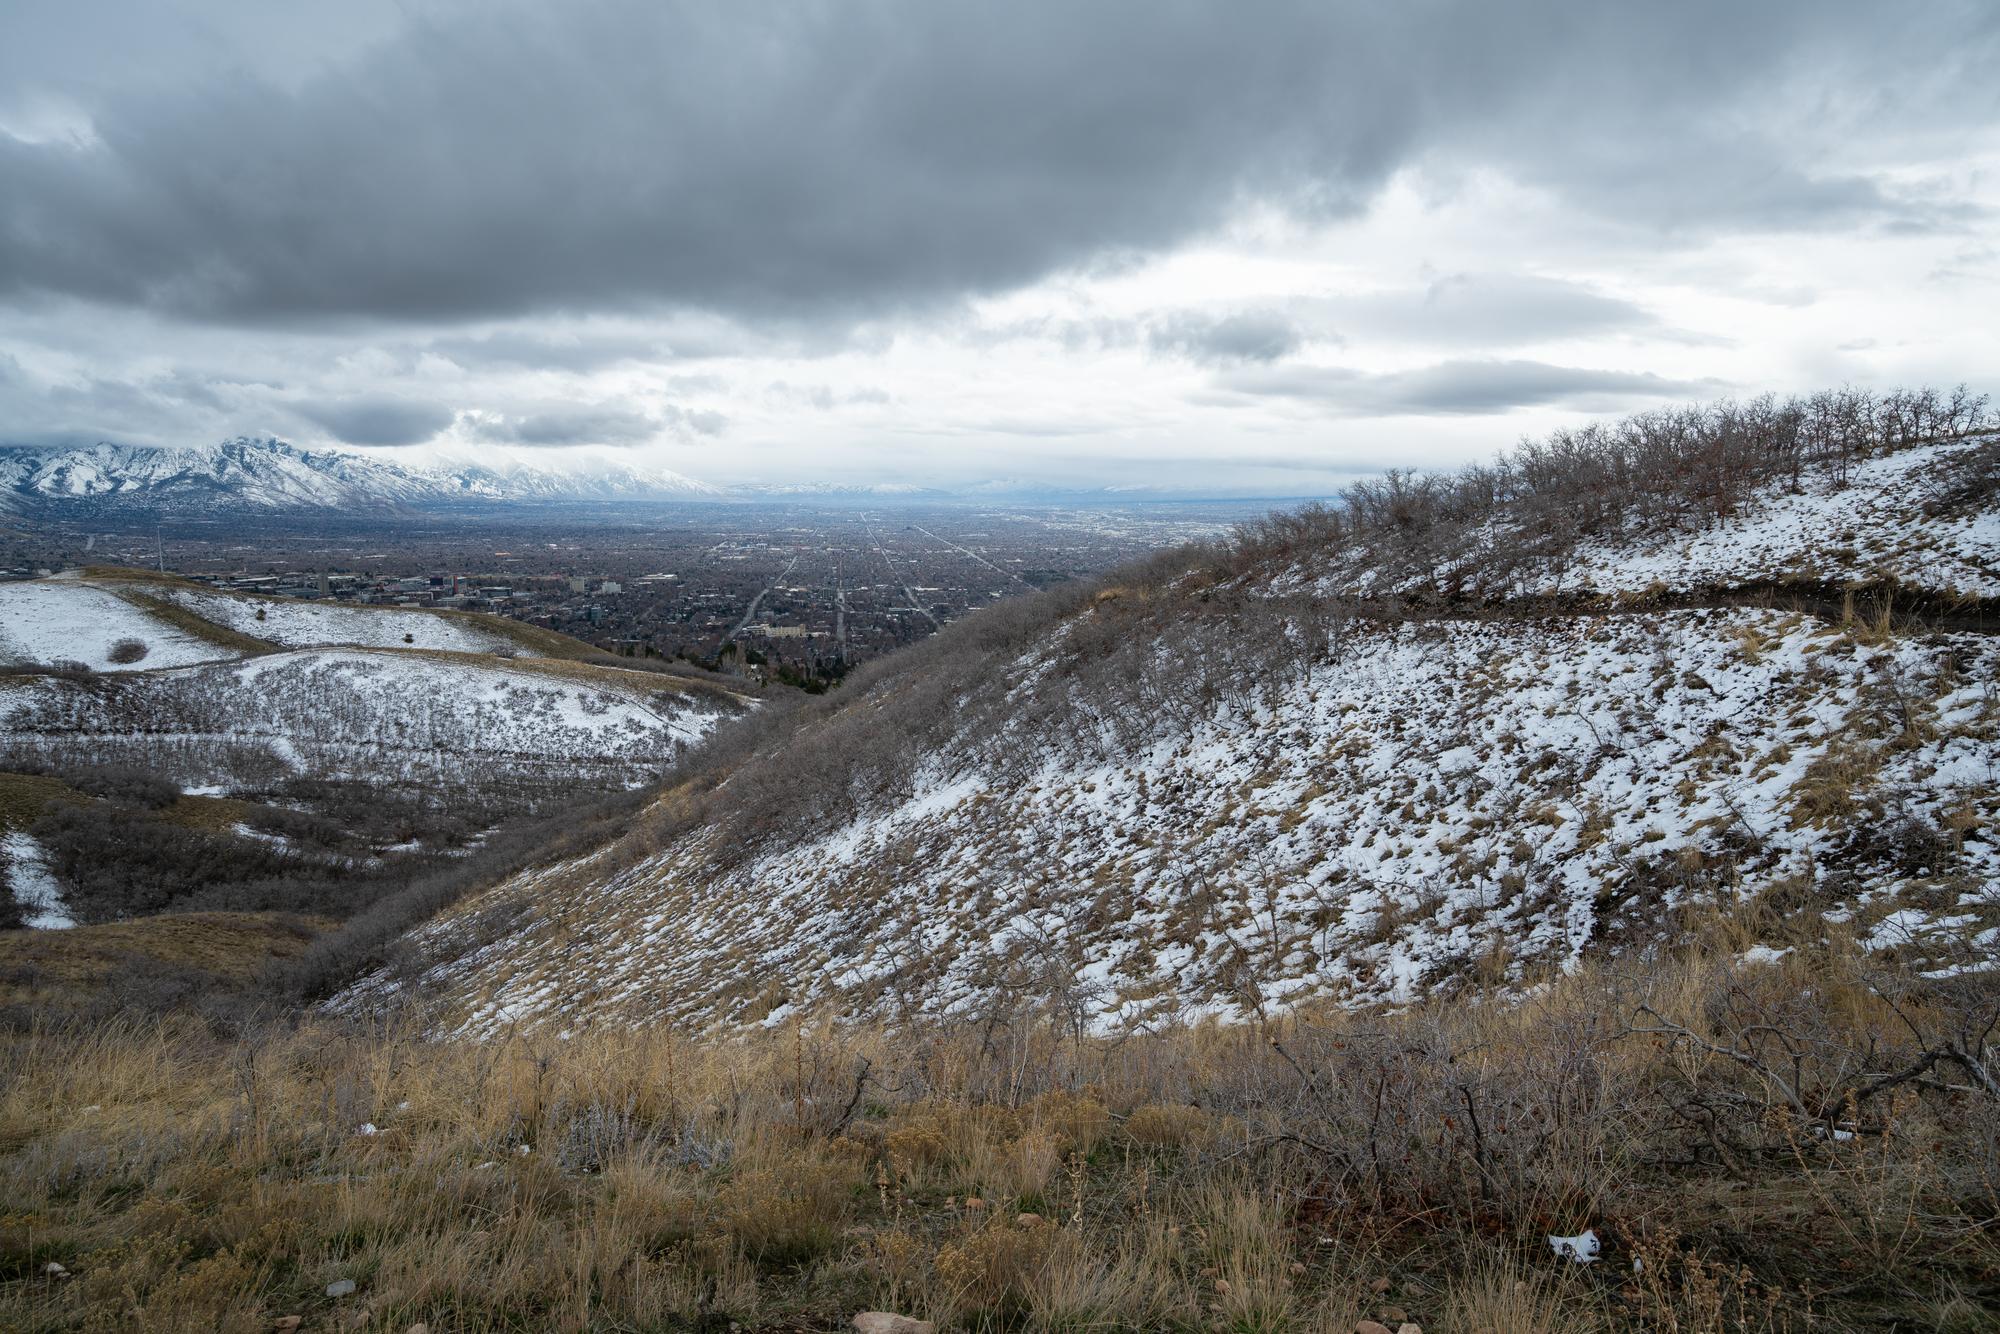 View of Salt Lake Valley from Valley View Trail.